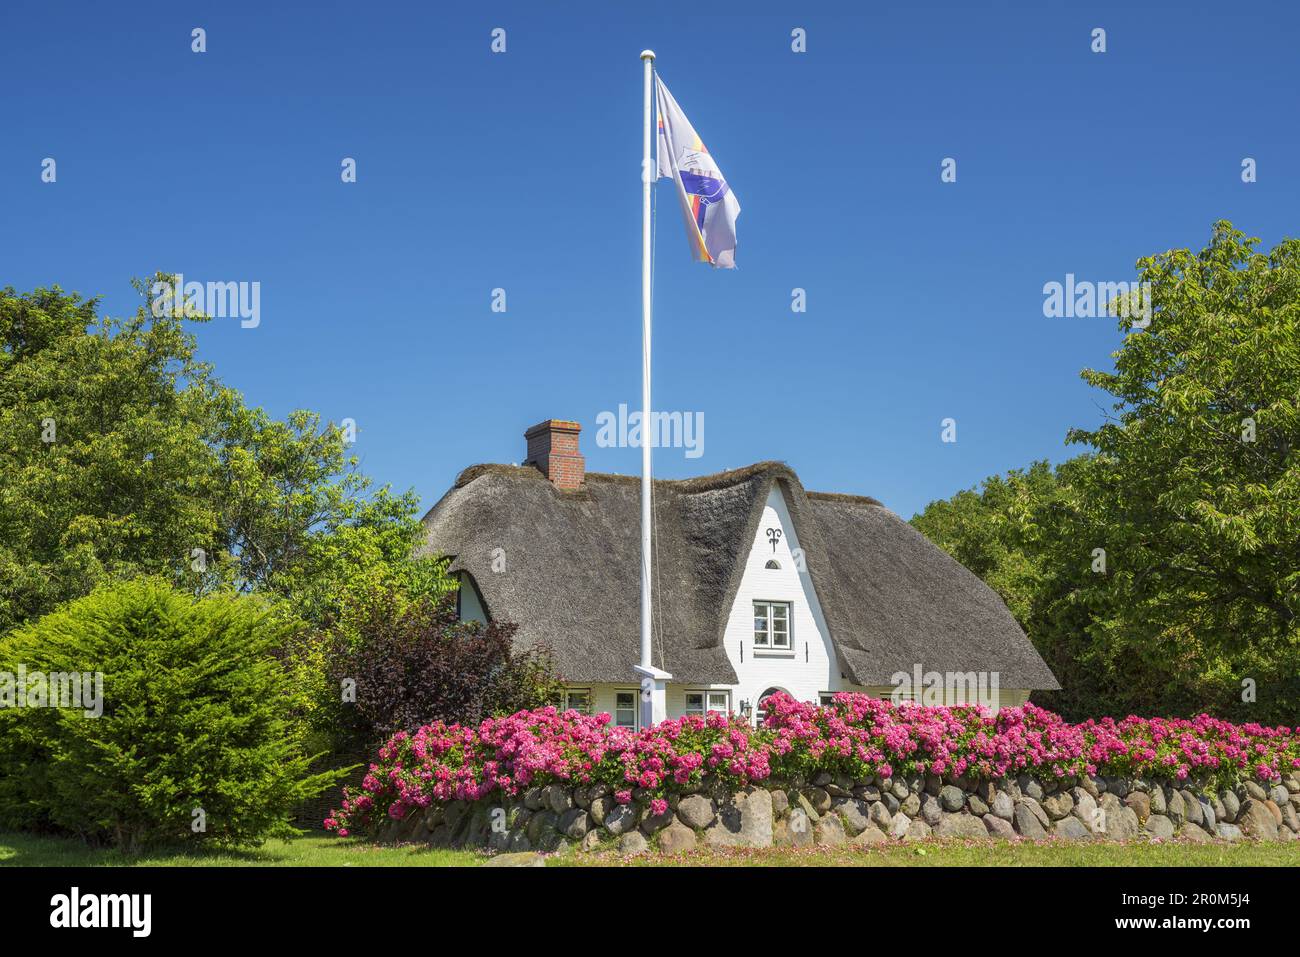 Thatched house in Morsum, North Frisian Island Sylt, North Sea coast, Schleswig-Holstein, Northern Germany, Germany, Europe Stock Photo